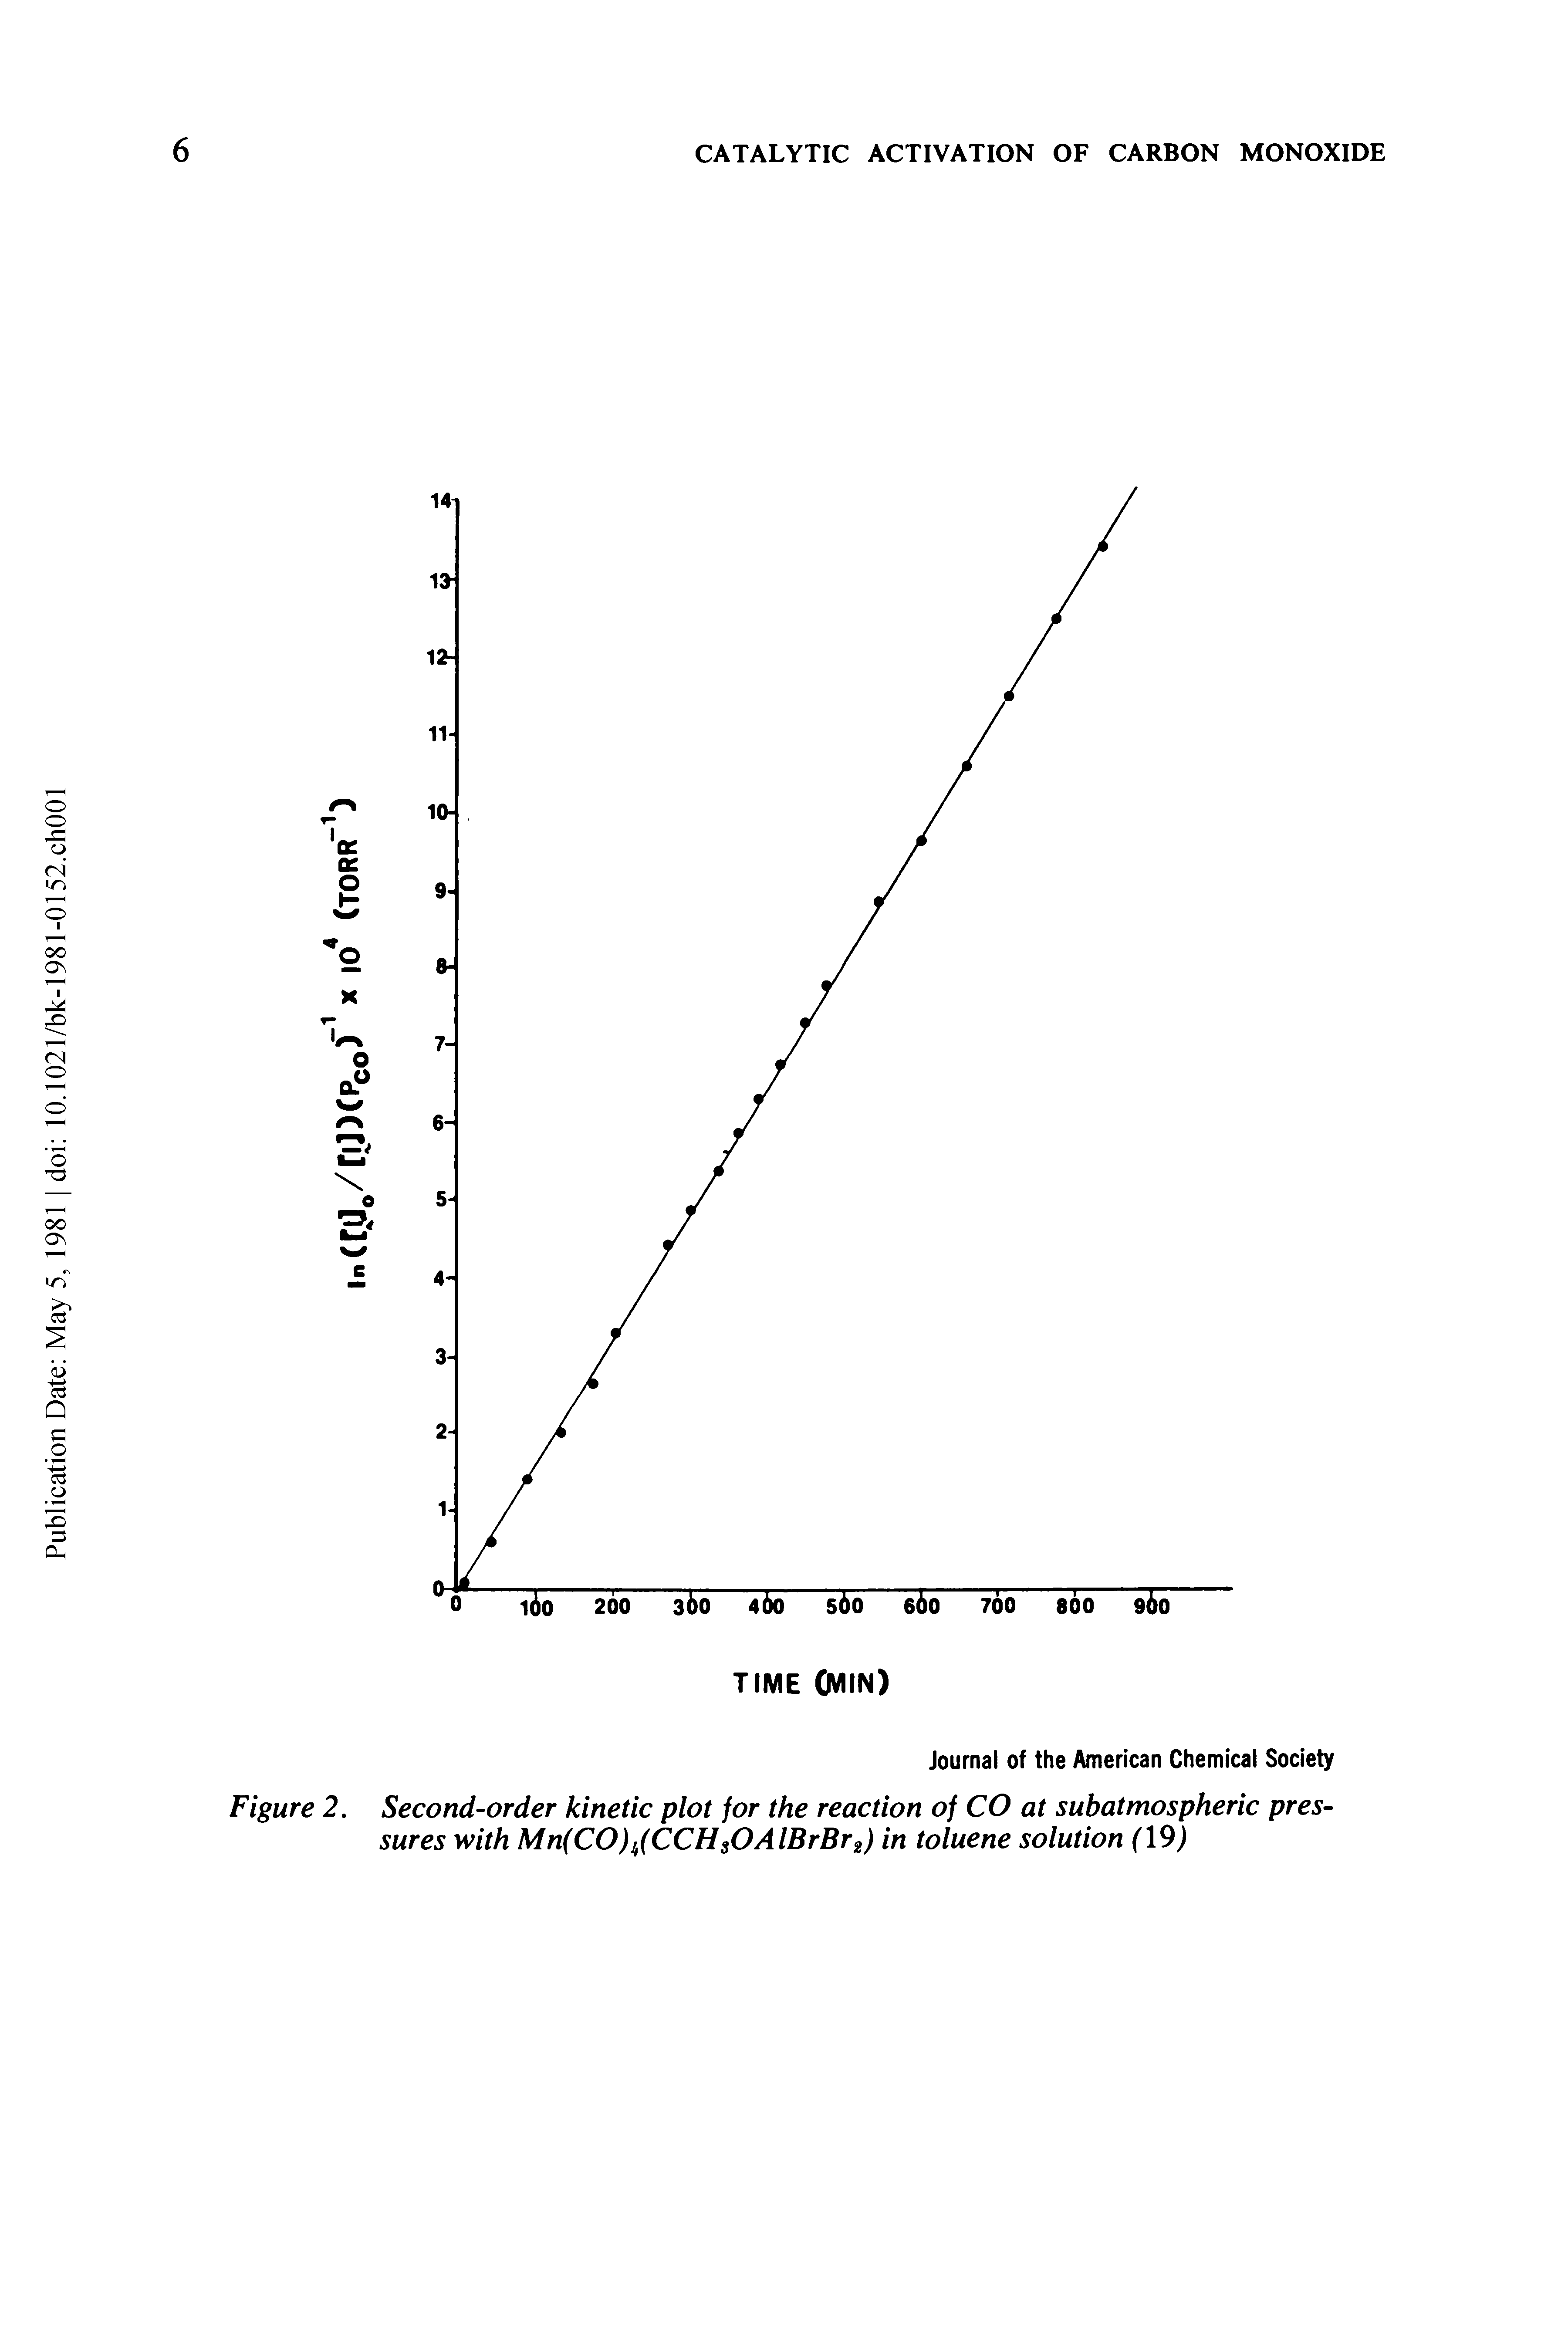 Figure 2. Second-order kinetic plot for the reaction of CO at subatmospheric pressures with Mn(CO)k(CCHsOAlBrBr2) in toluene solution (19)...